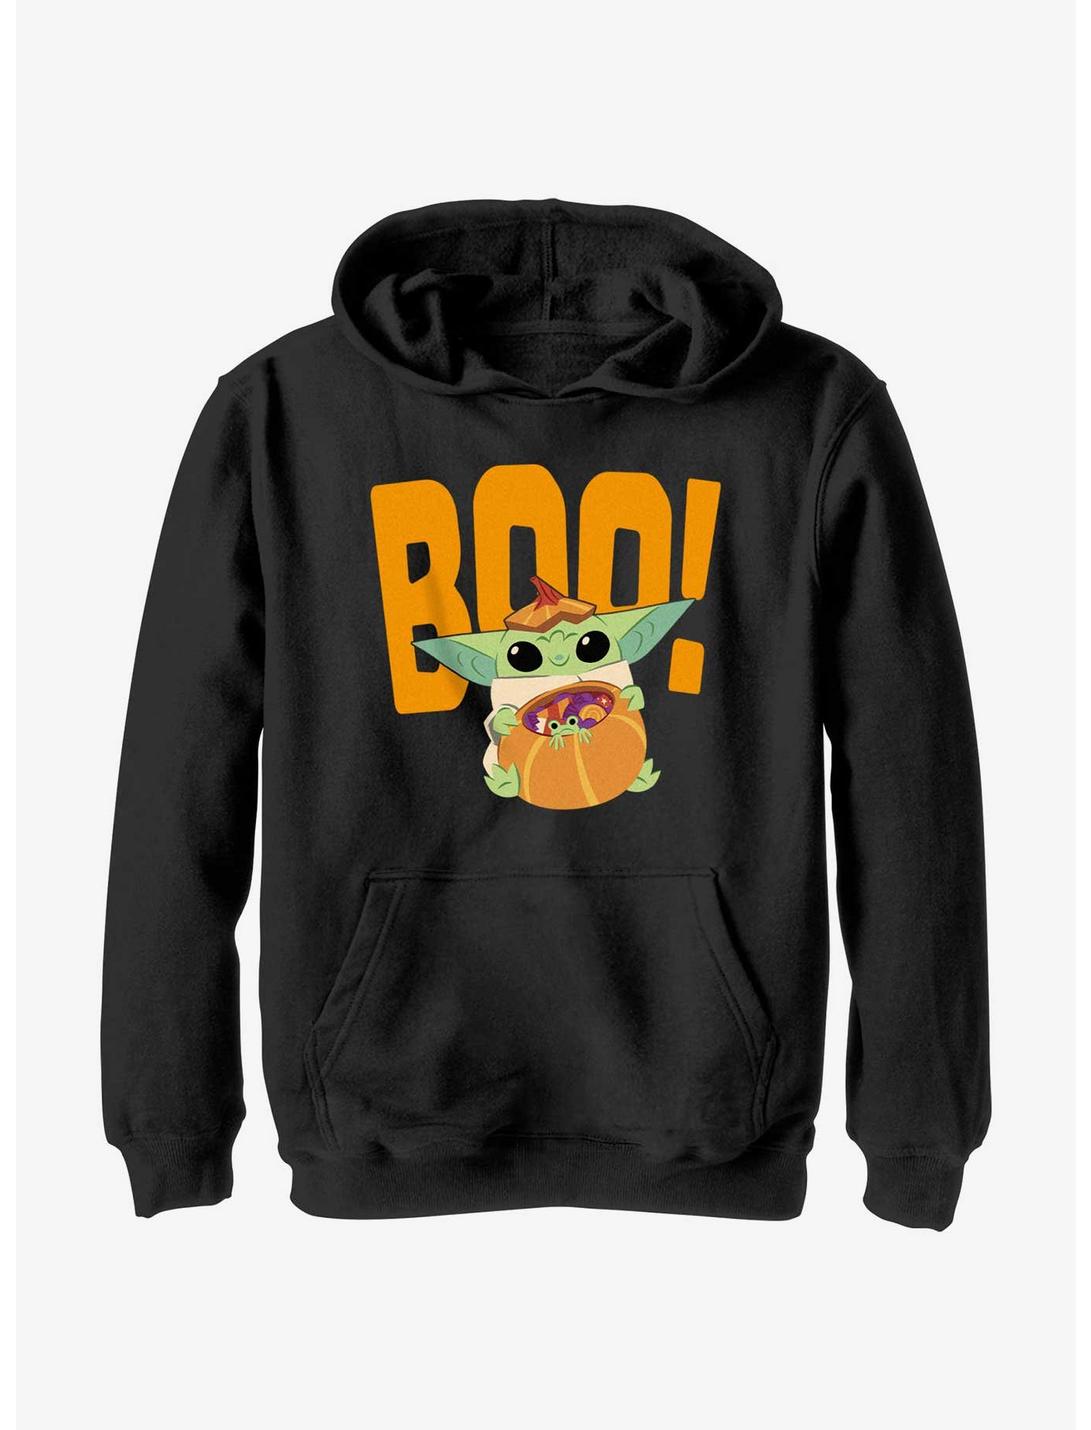 Star Wars The Mandalorian The Child Boo Youth Hoodie, BLACK, hi-res